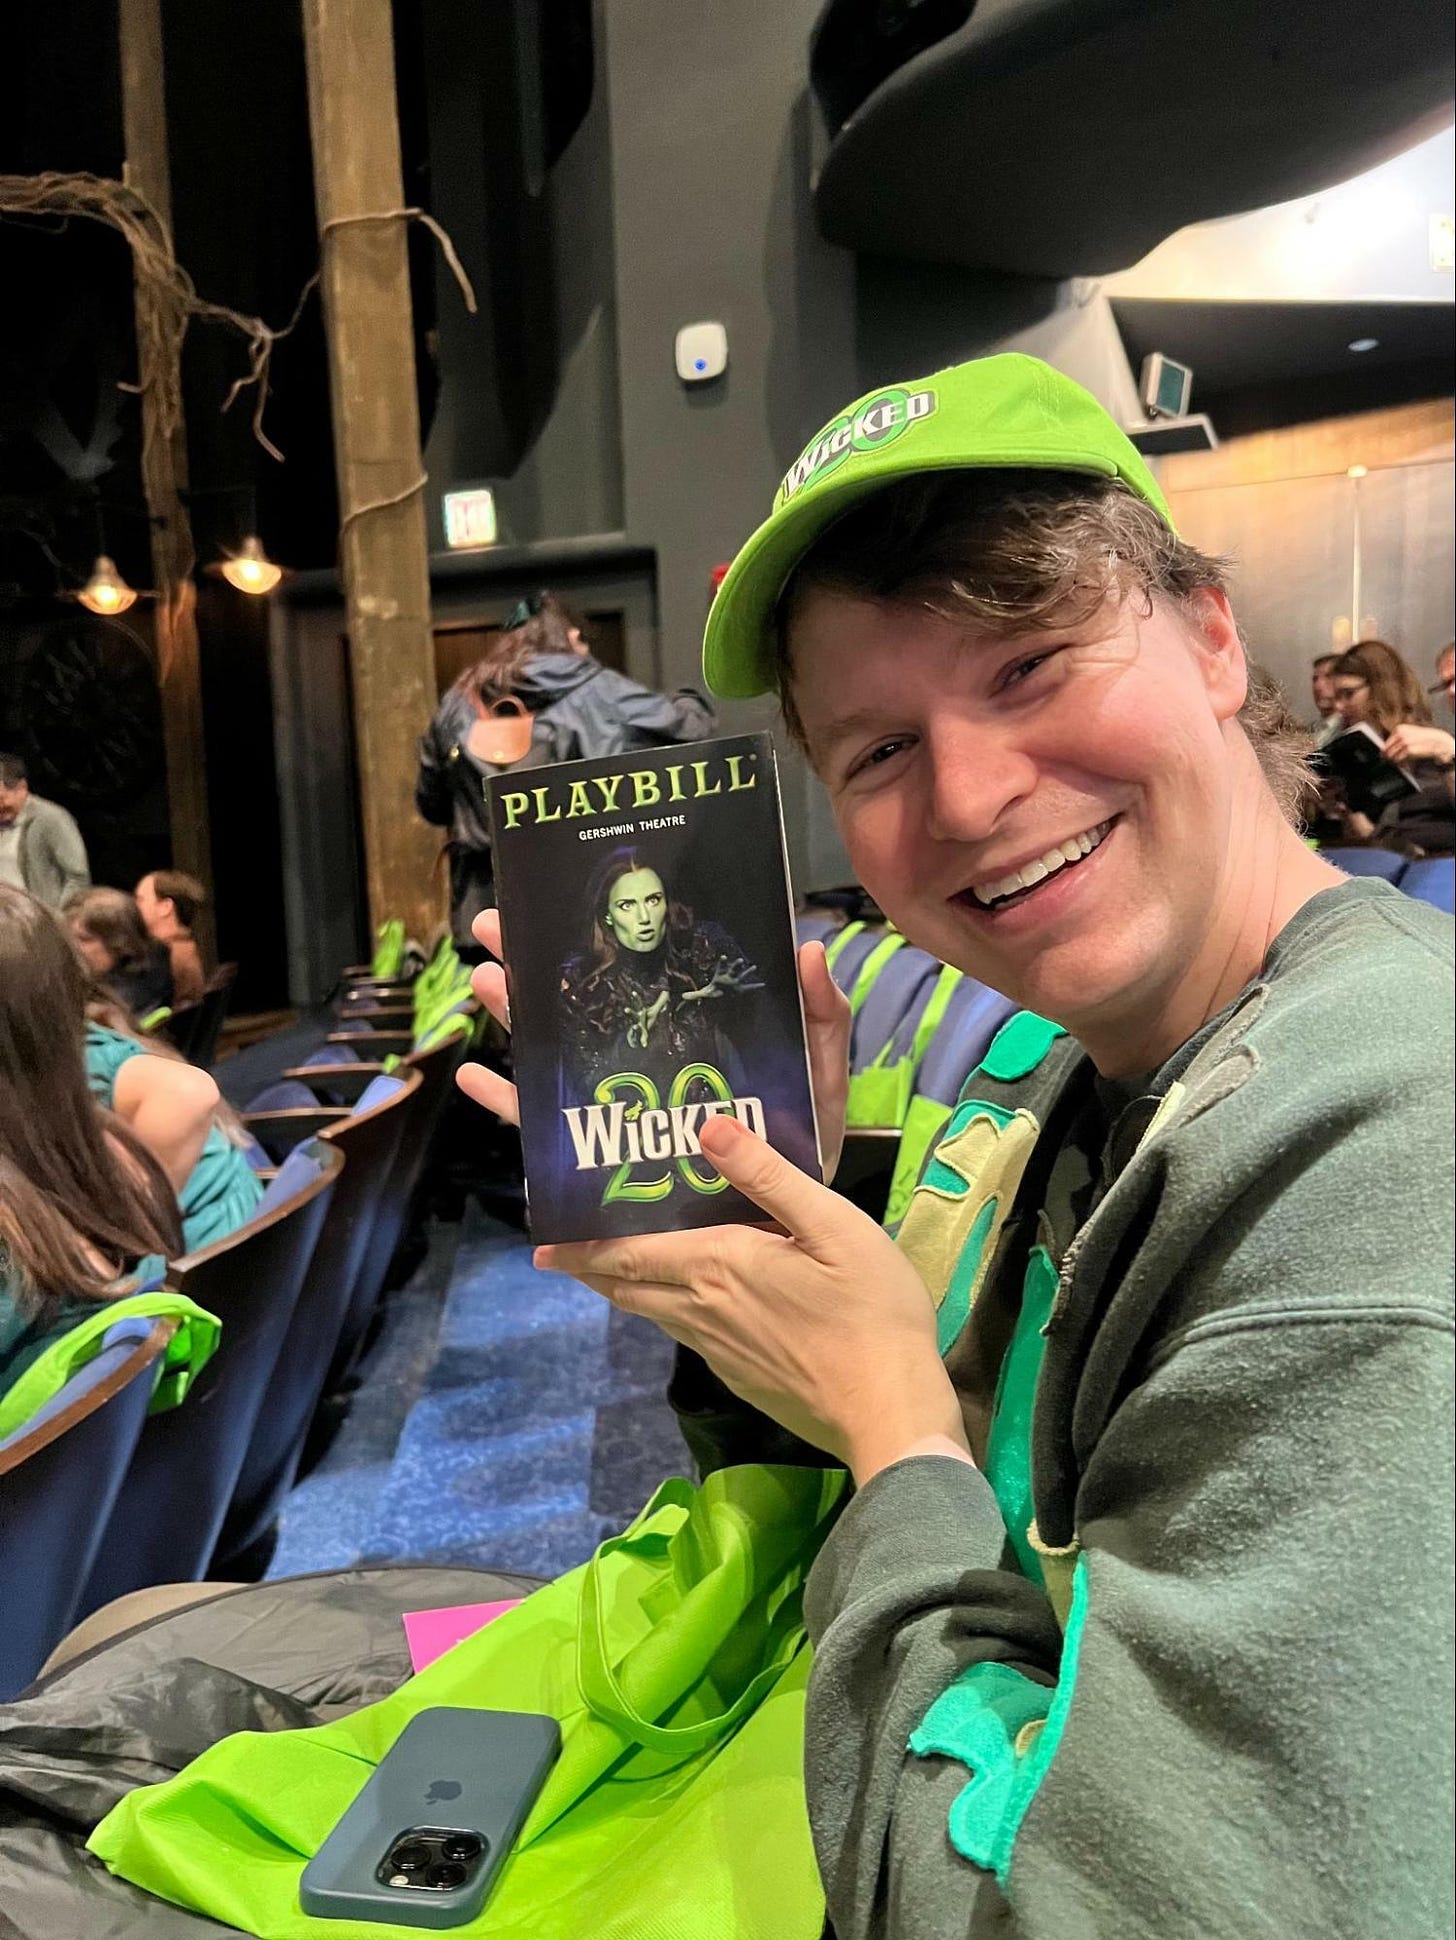 Zach Zimmerman holds up his playbill at Wicked